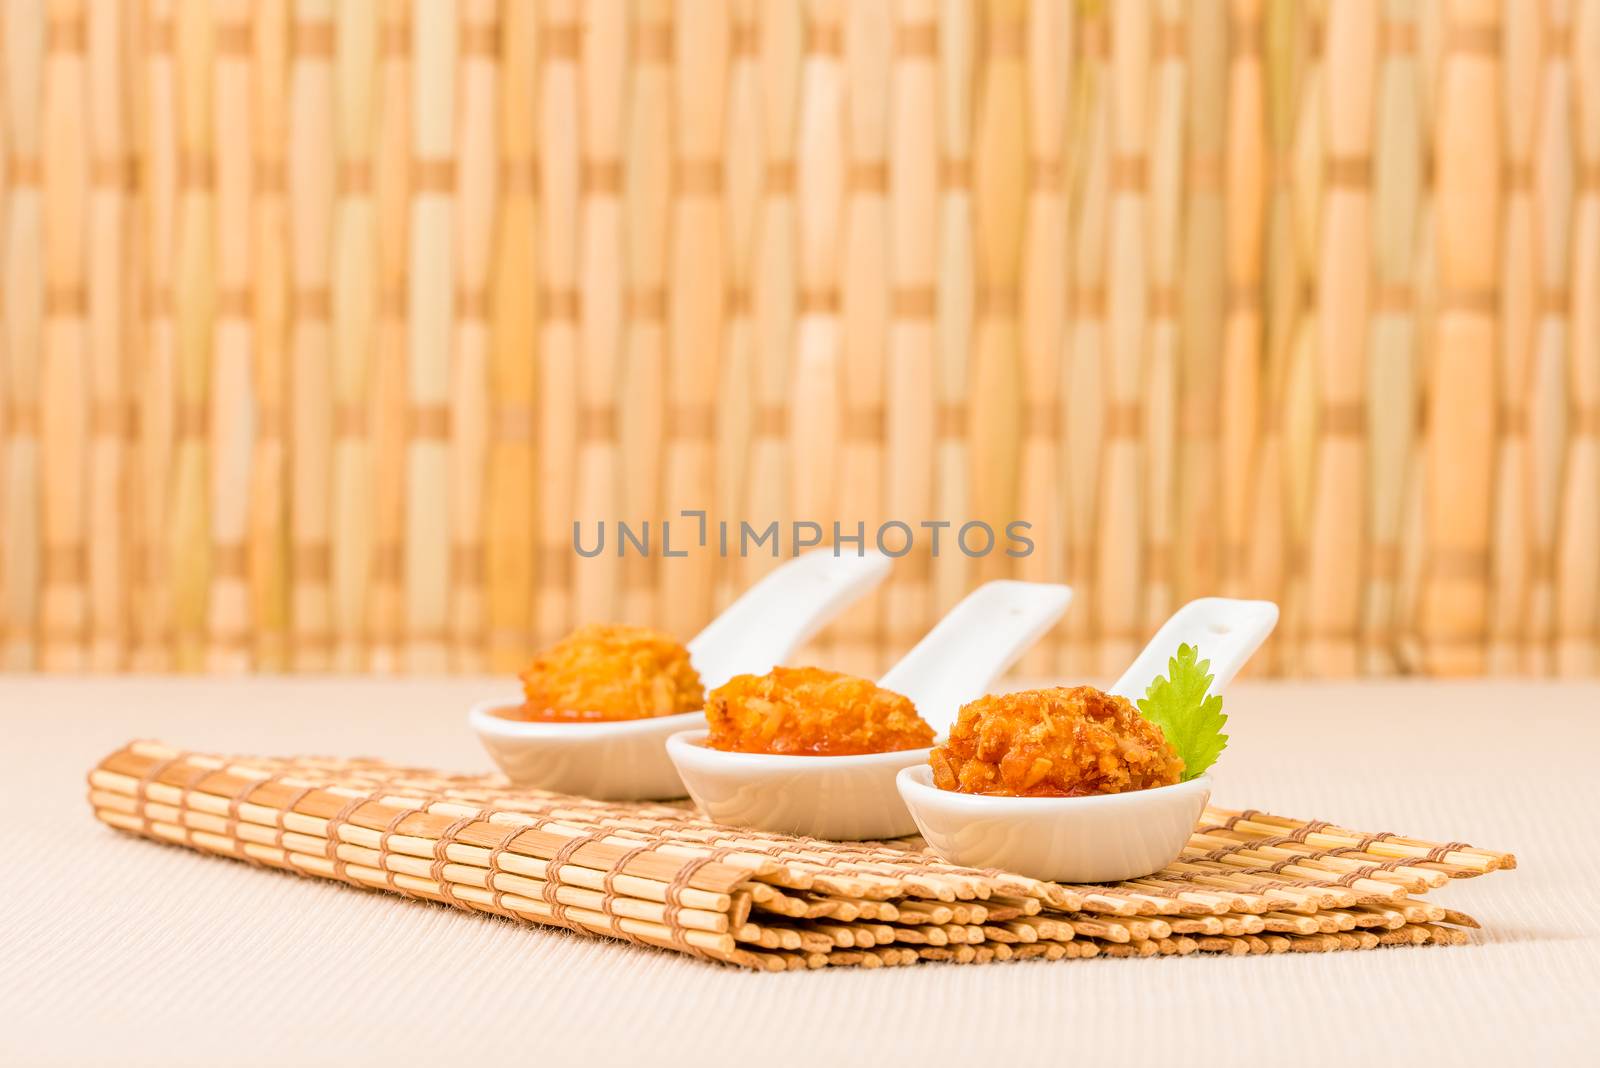 Coconut crusted chicken with dipping sauce with a background of bamboo.